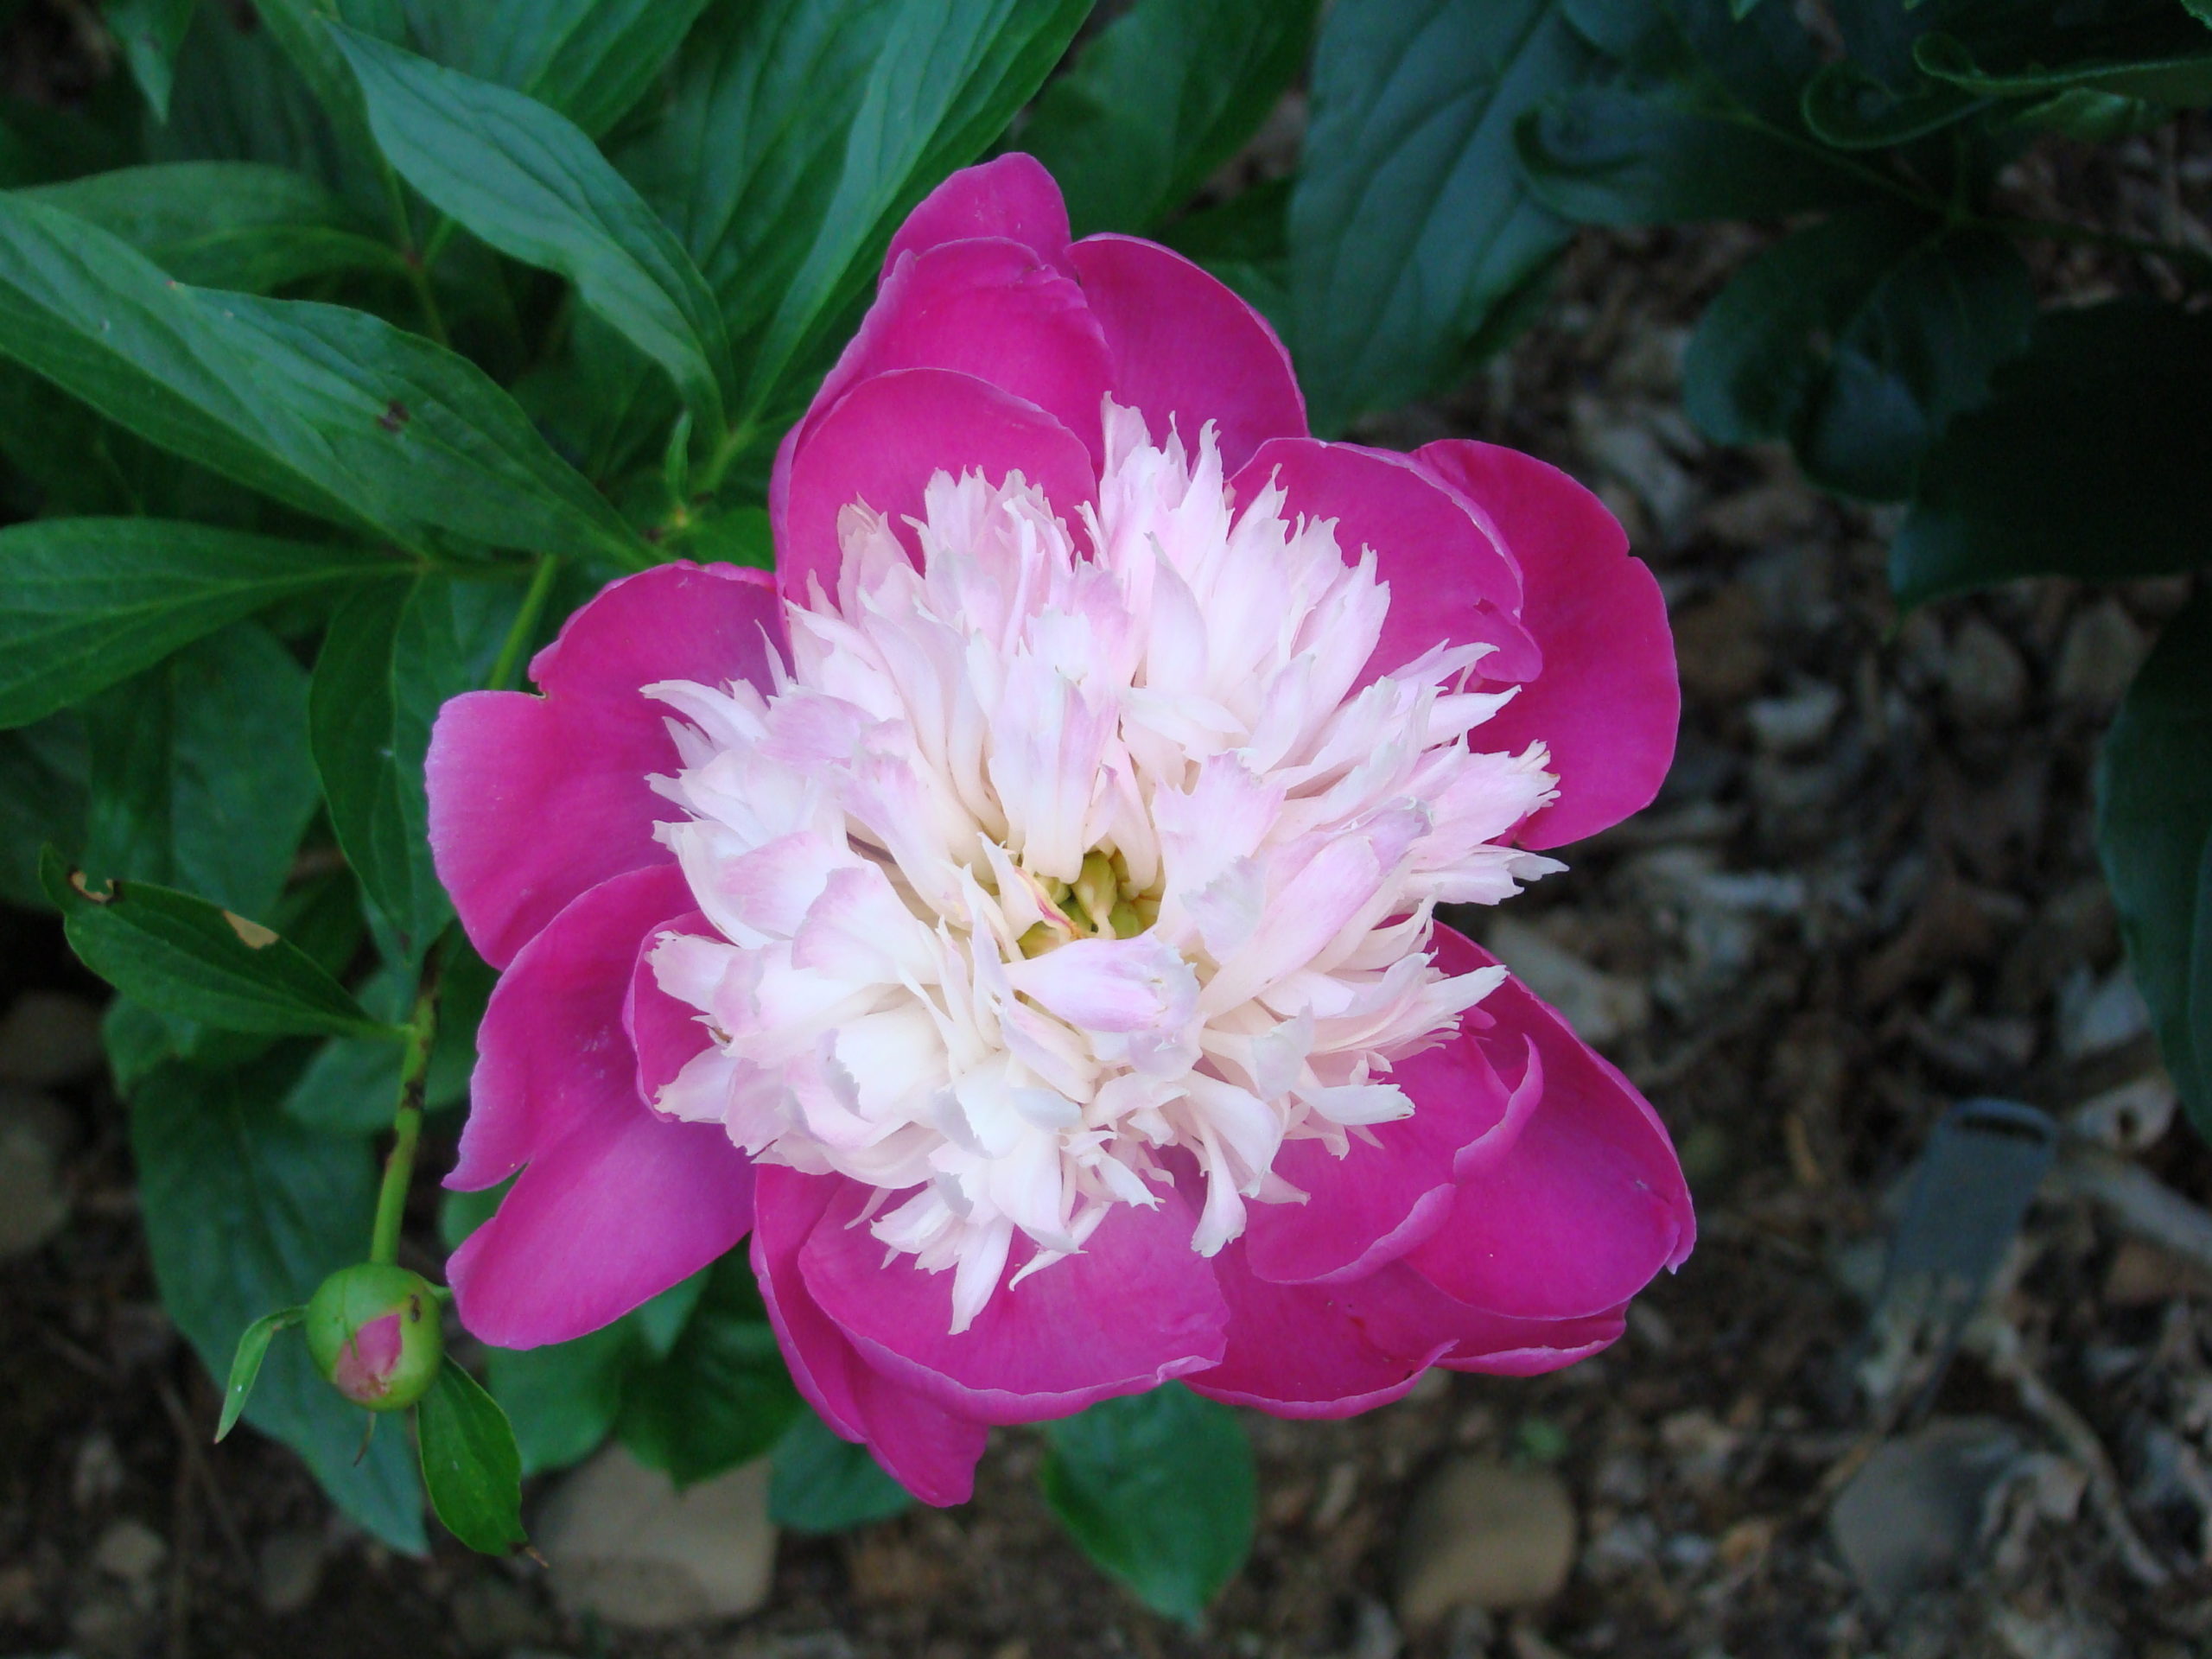 A peony, possibly White Cap, grows to about 34 inches with a frilly buff to white center and dark pink to beet red petals.  This is a midseason type so it will bloom around June 15 on the East End.